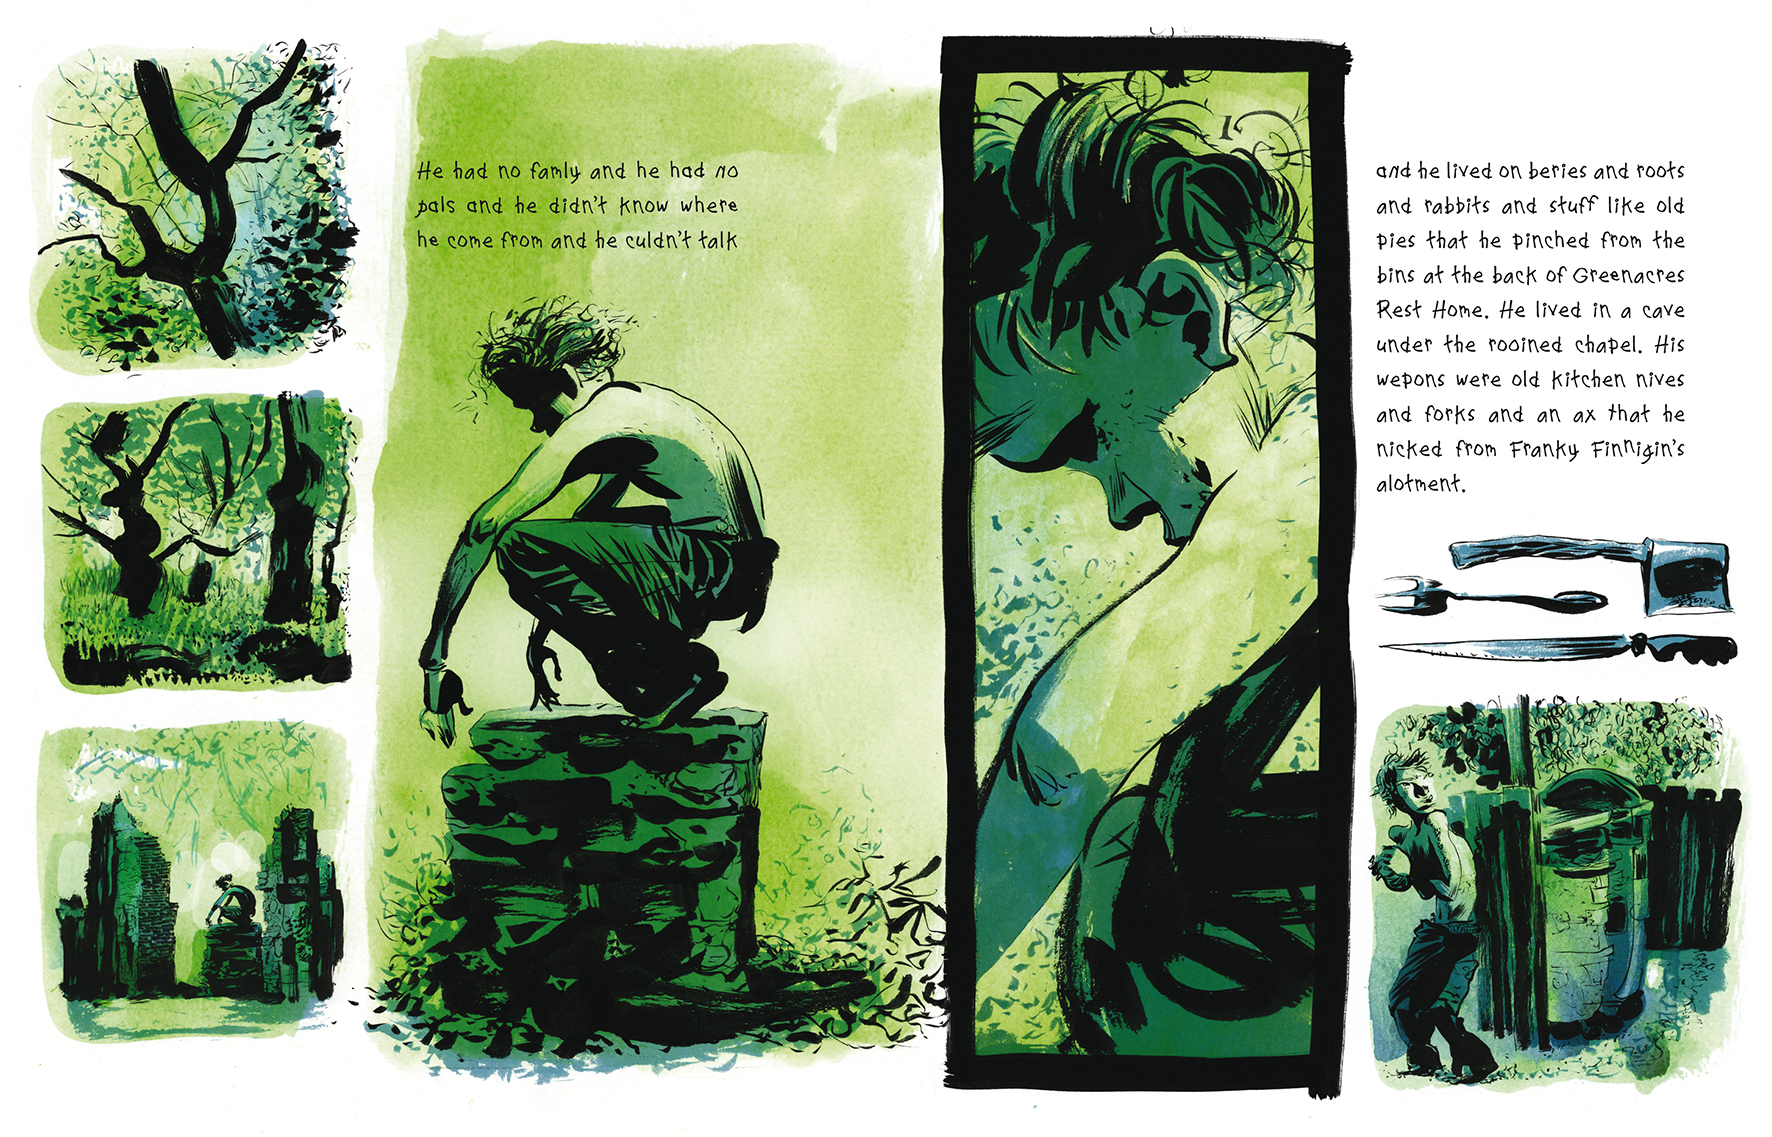 Spread from The Savage. Illustrations by Dave McKean.